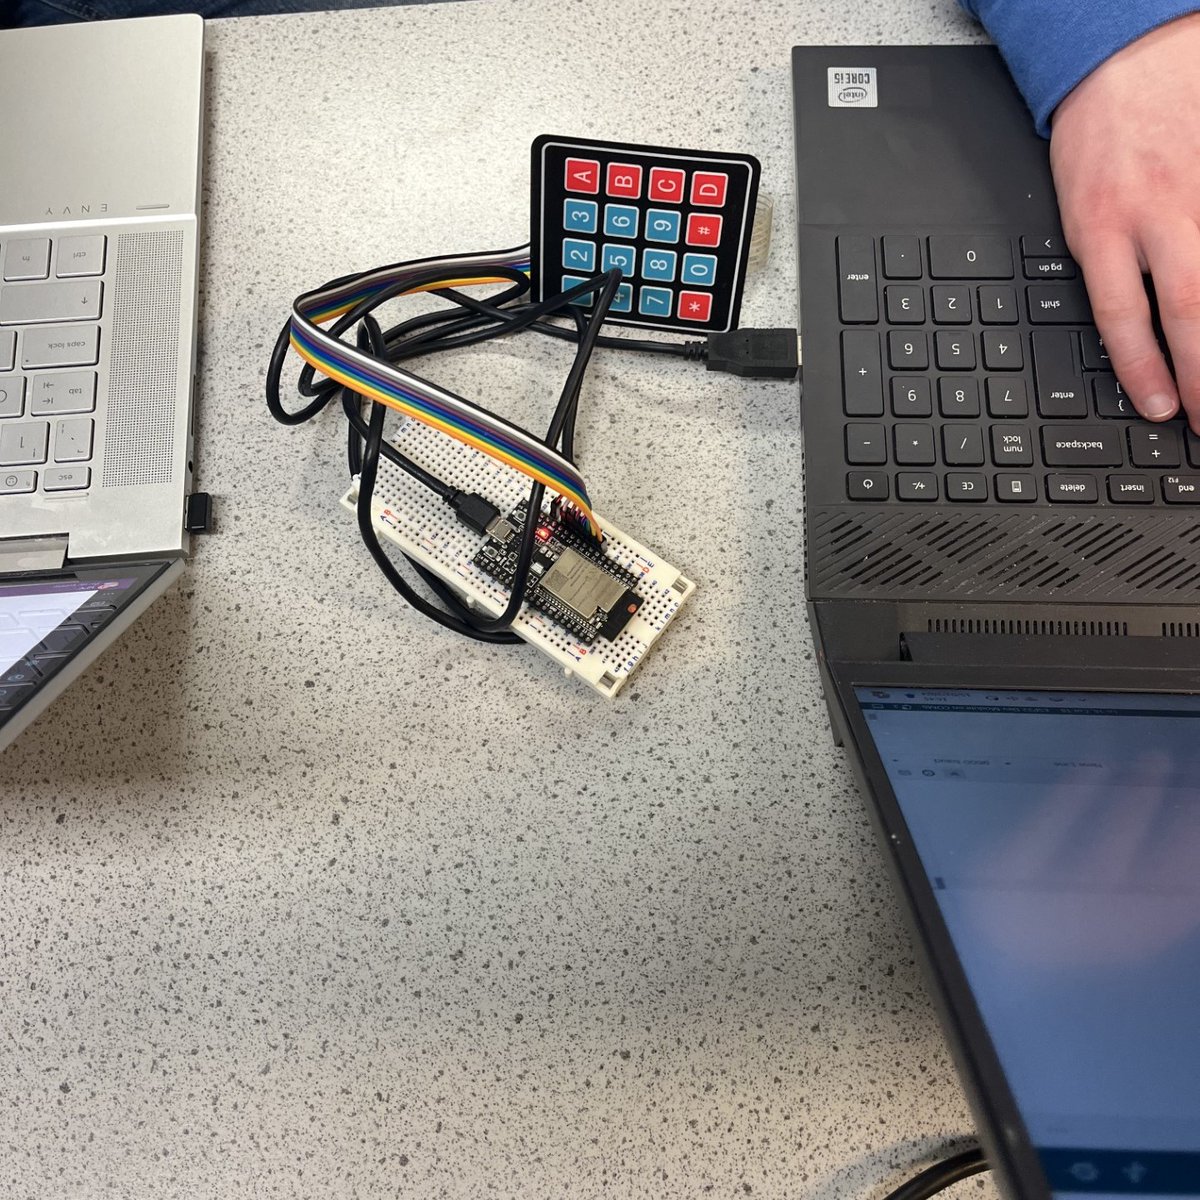 Today, our Rugby Scoreboard Club split into three teams to (a) practice soldering (b) to continue with the front panel design and (c) to program the ESP32 Dev Kit to test our written code (pictured). Huge thanks to Adam @GBElectronicsUK for sharing his expertise and knowledge!